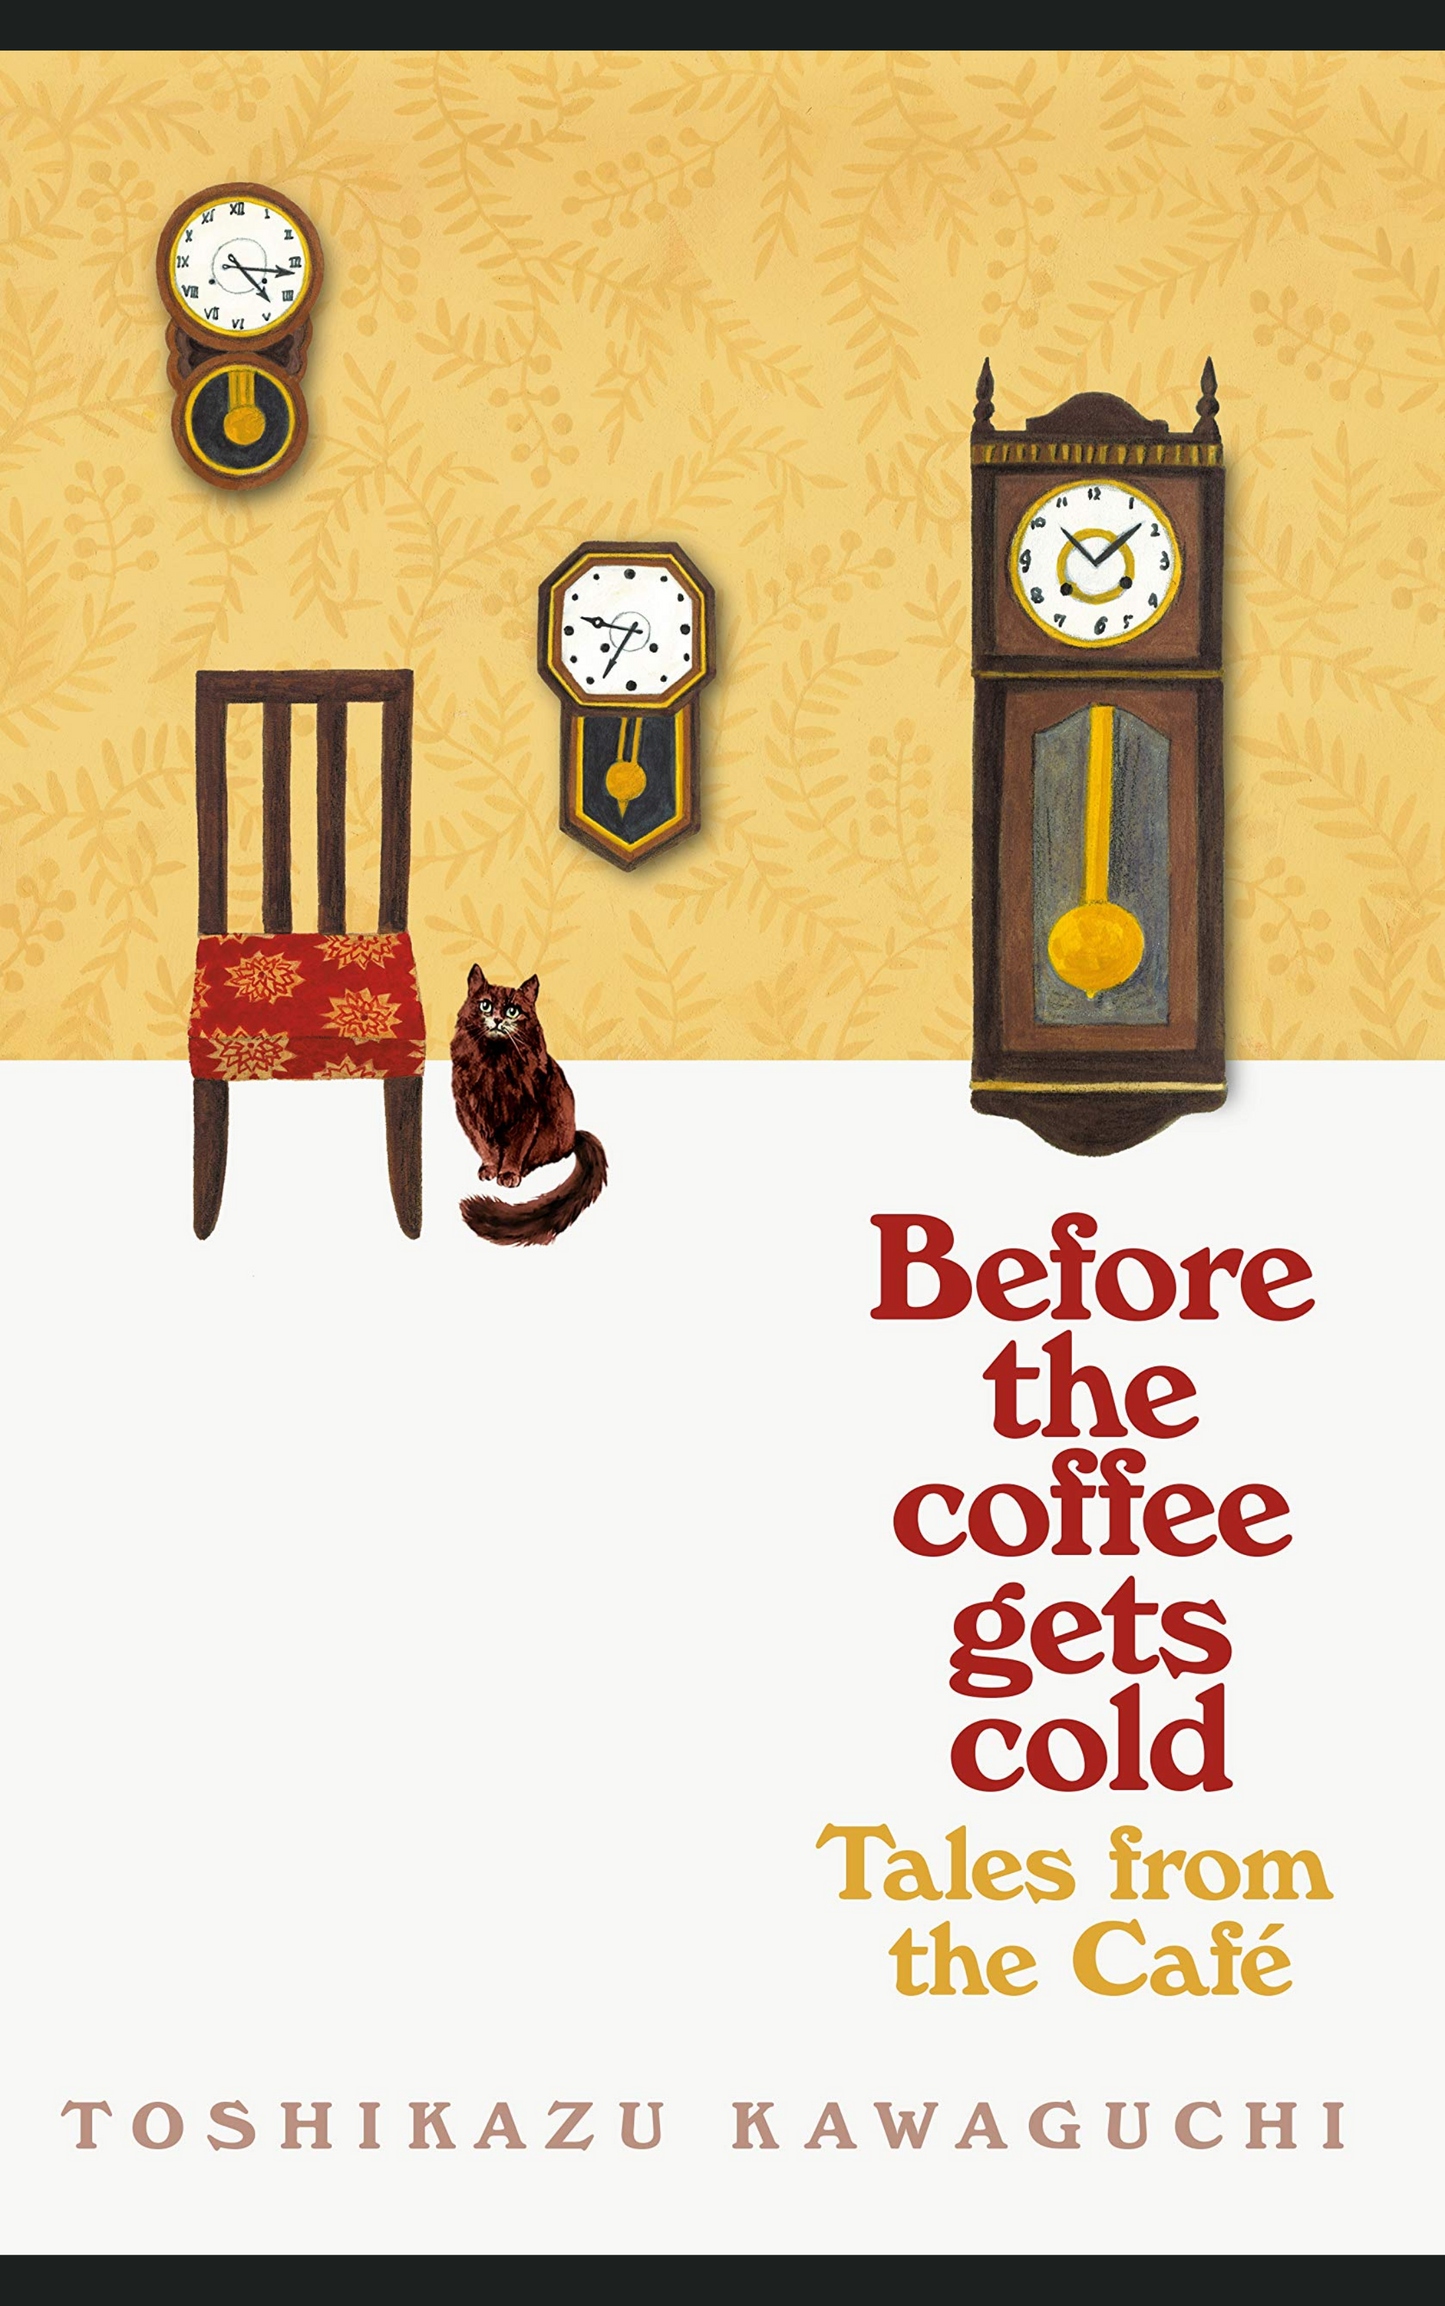 TALES FROM THE CAFE: BEFORE THE COFFEE GETS COLD